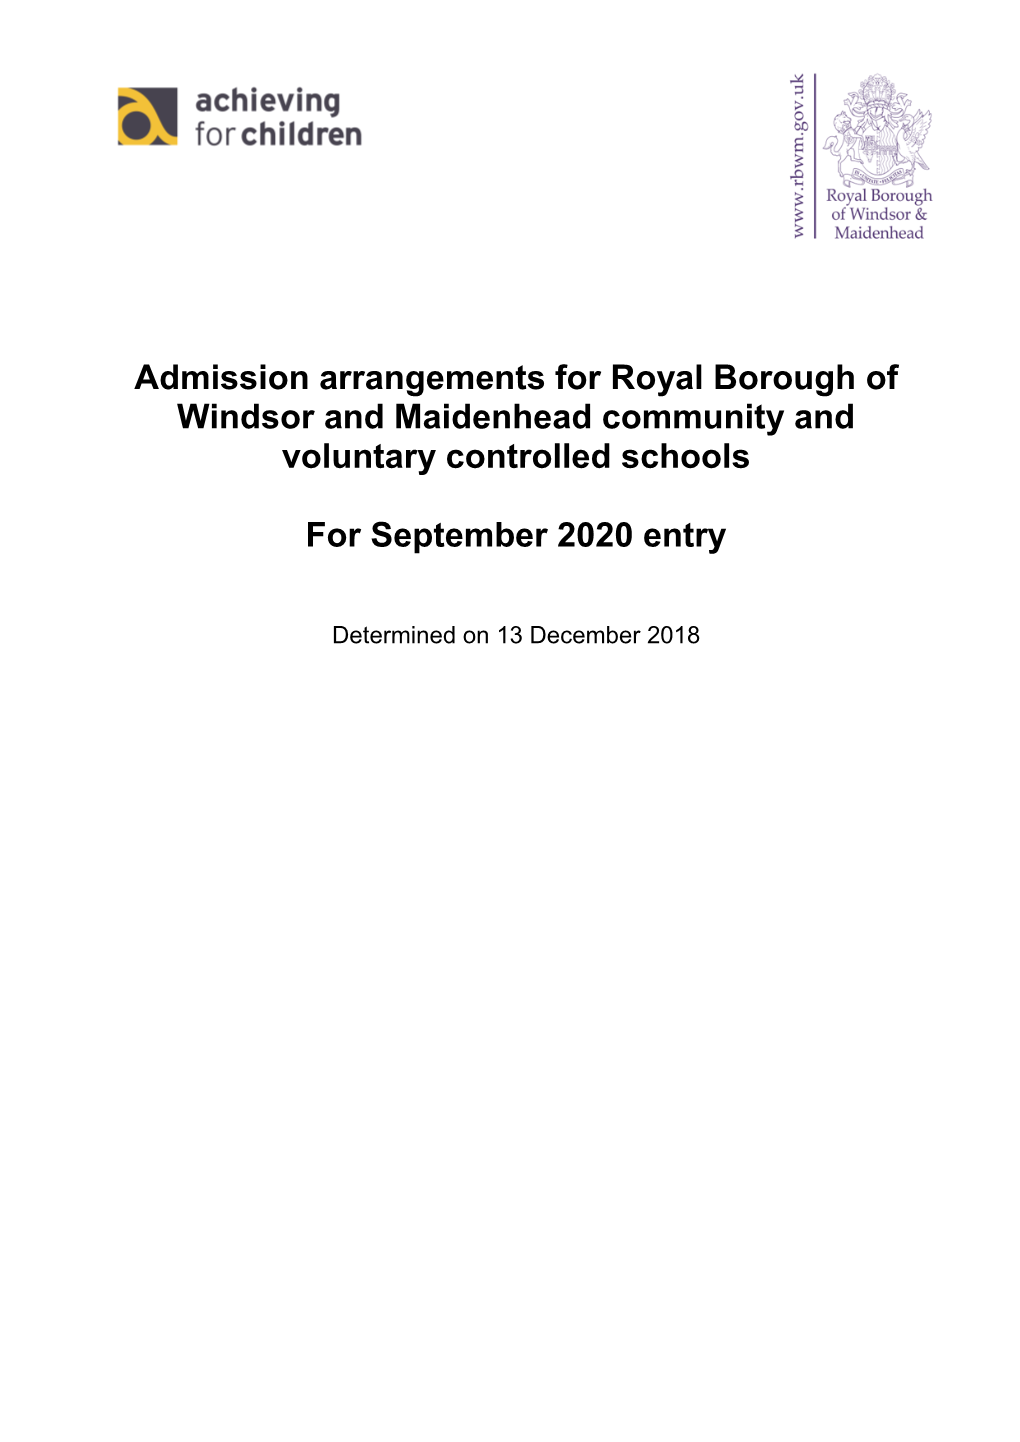 Admission Arrangements for Royal Borough of Windsor and Maidenhead Community and Voluntary Controlled Schools for September 2020